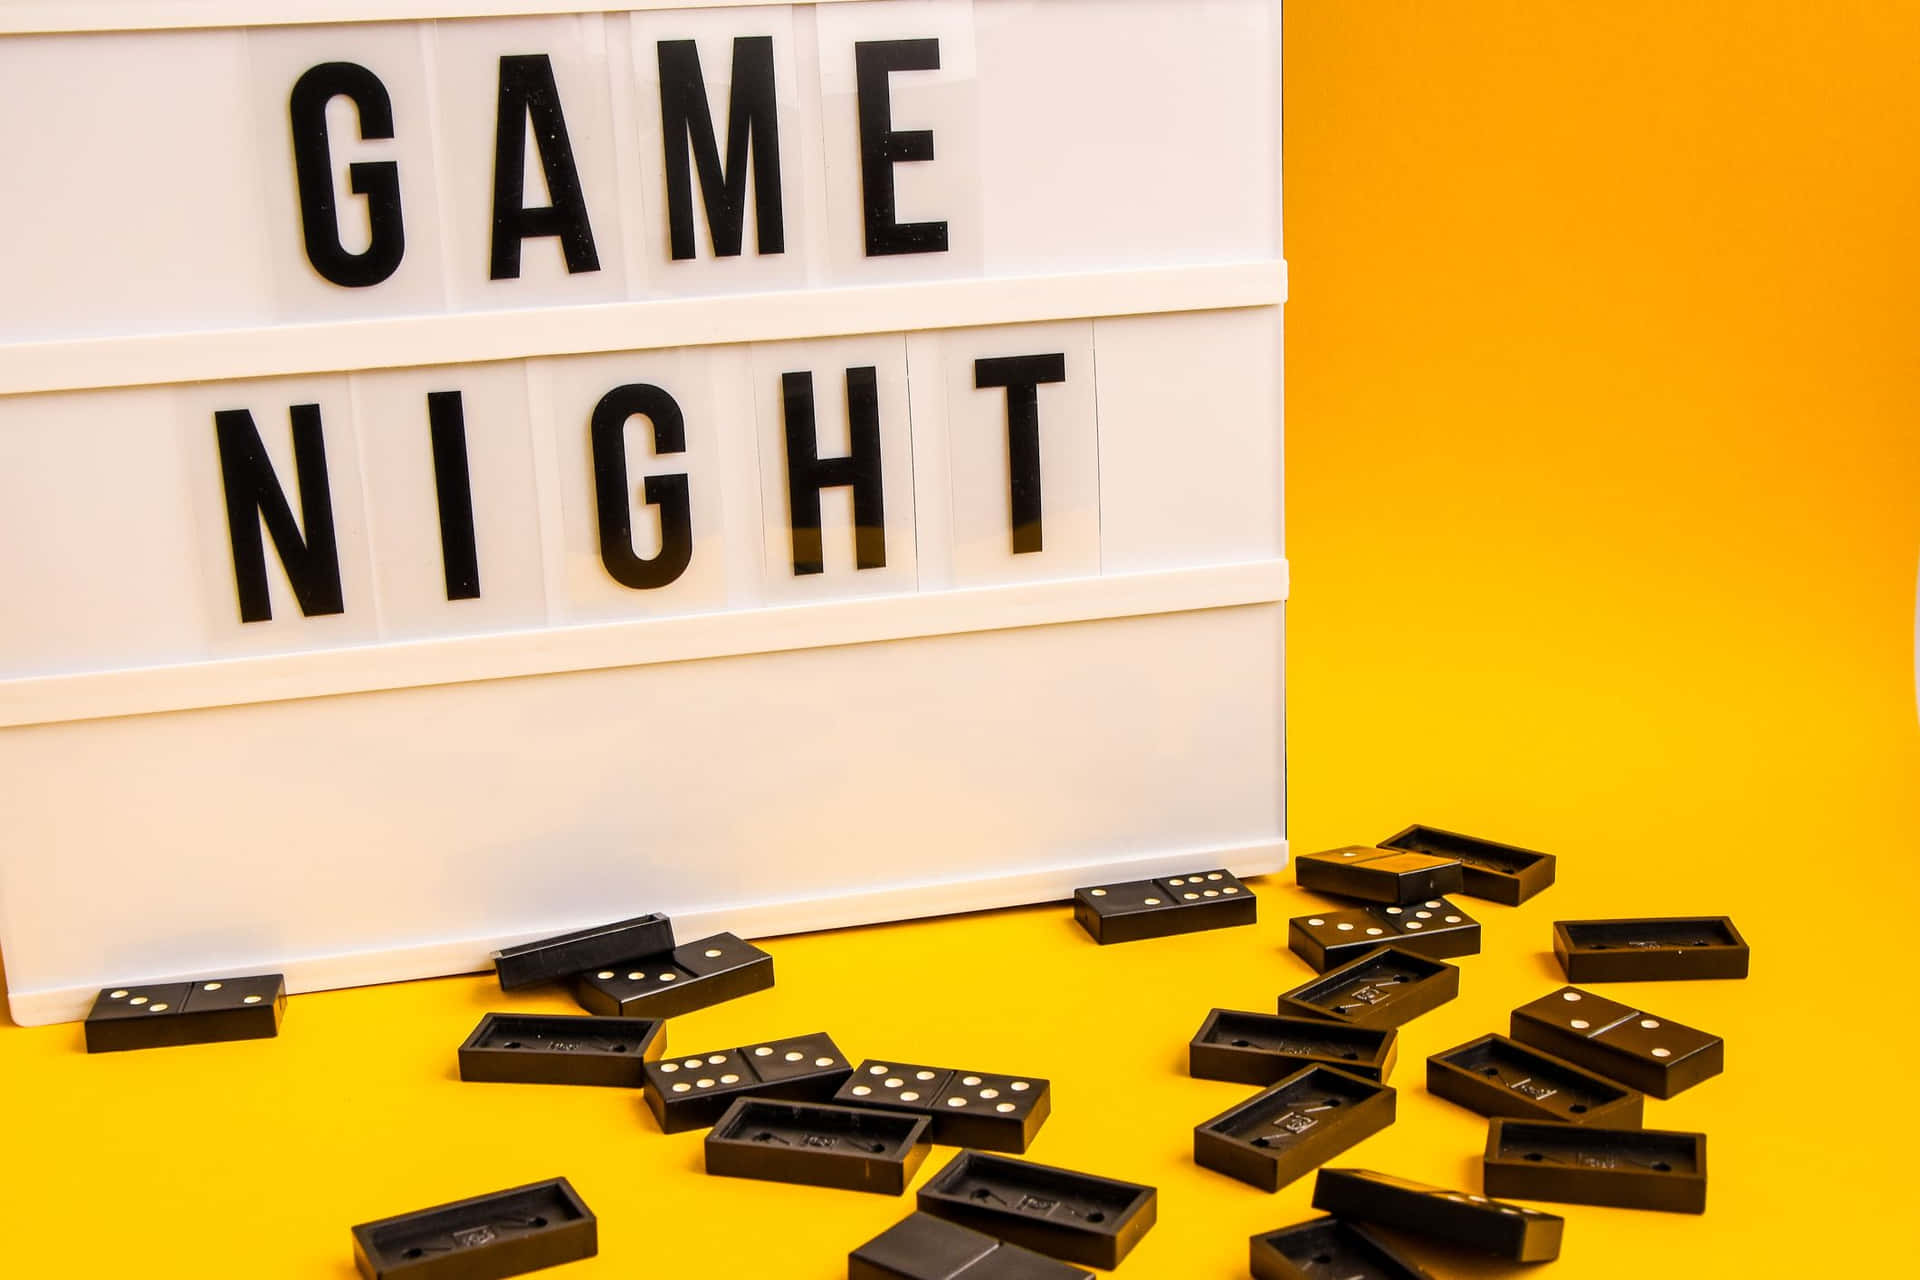 Gather around for the best game night ever!